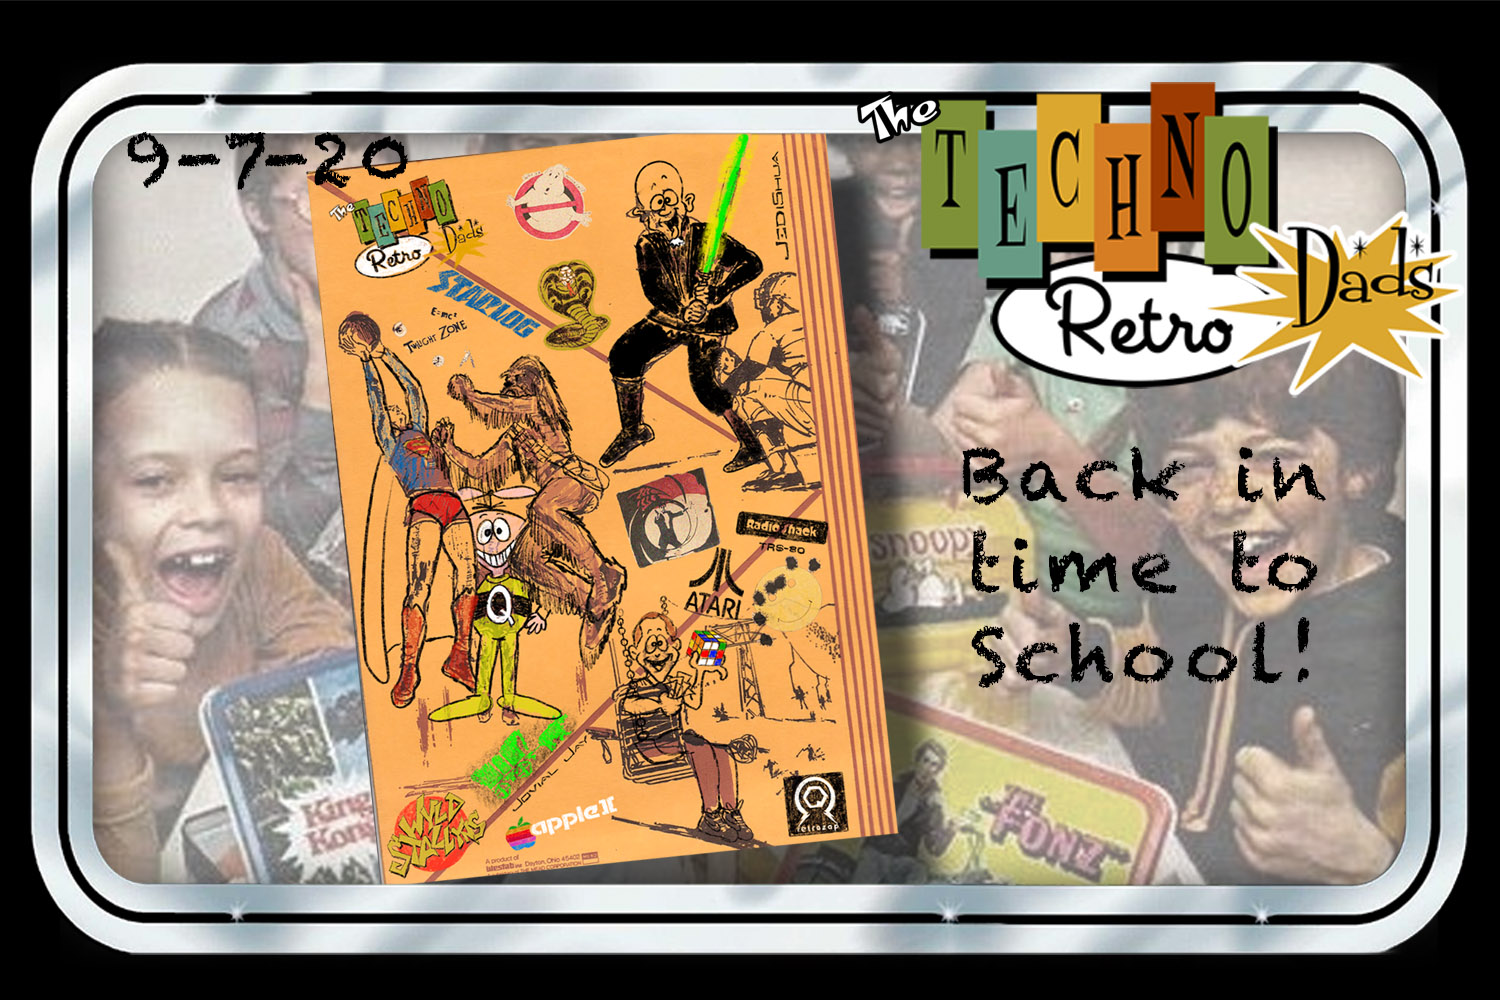 TechnoRetro Dads: Too Cool For School?